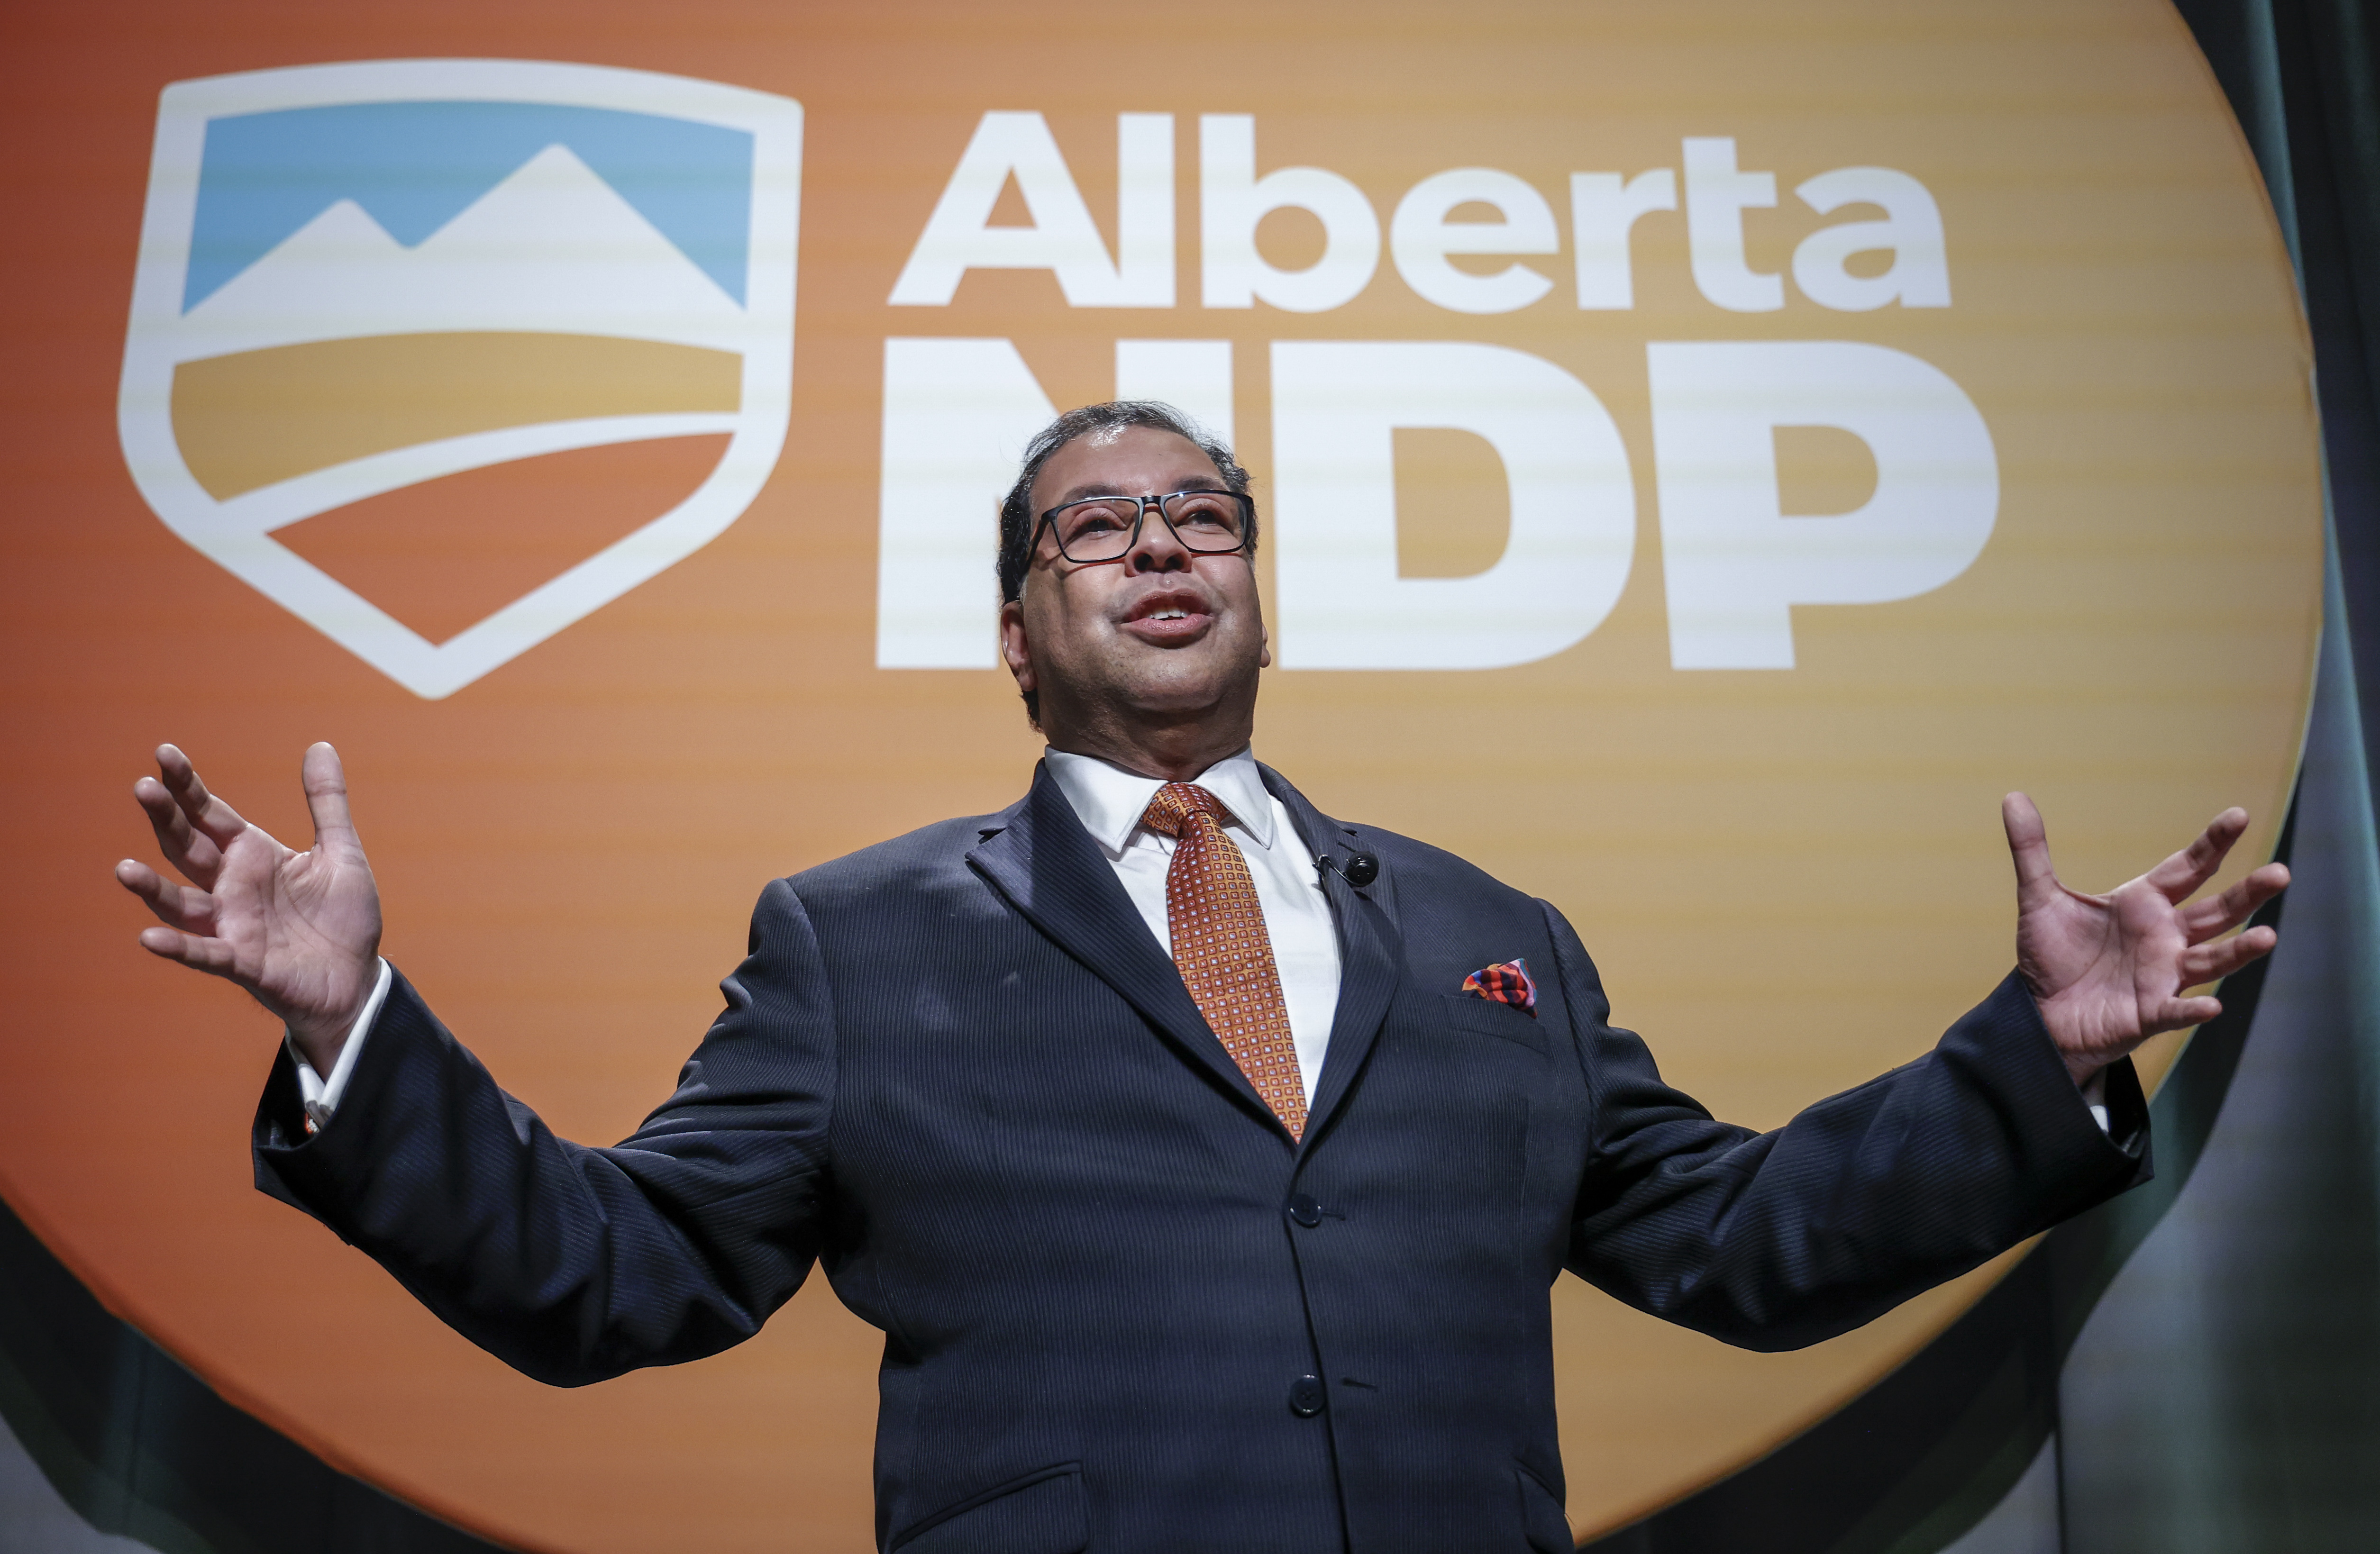 NDP leader Naheed Nenshi on coming out of retirement: ‘We need pragmatic, thoughtful, smart government’